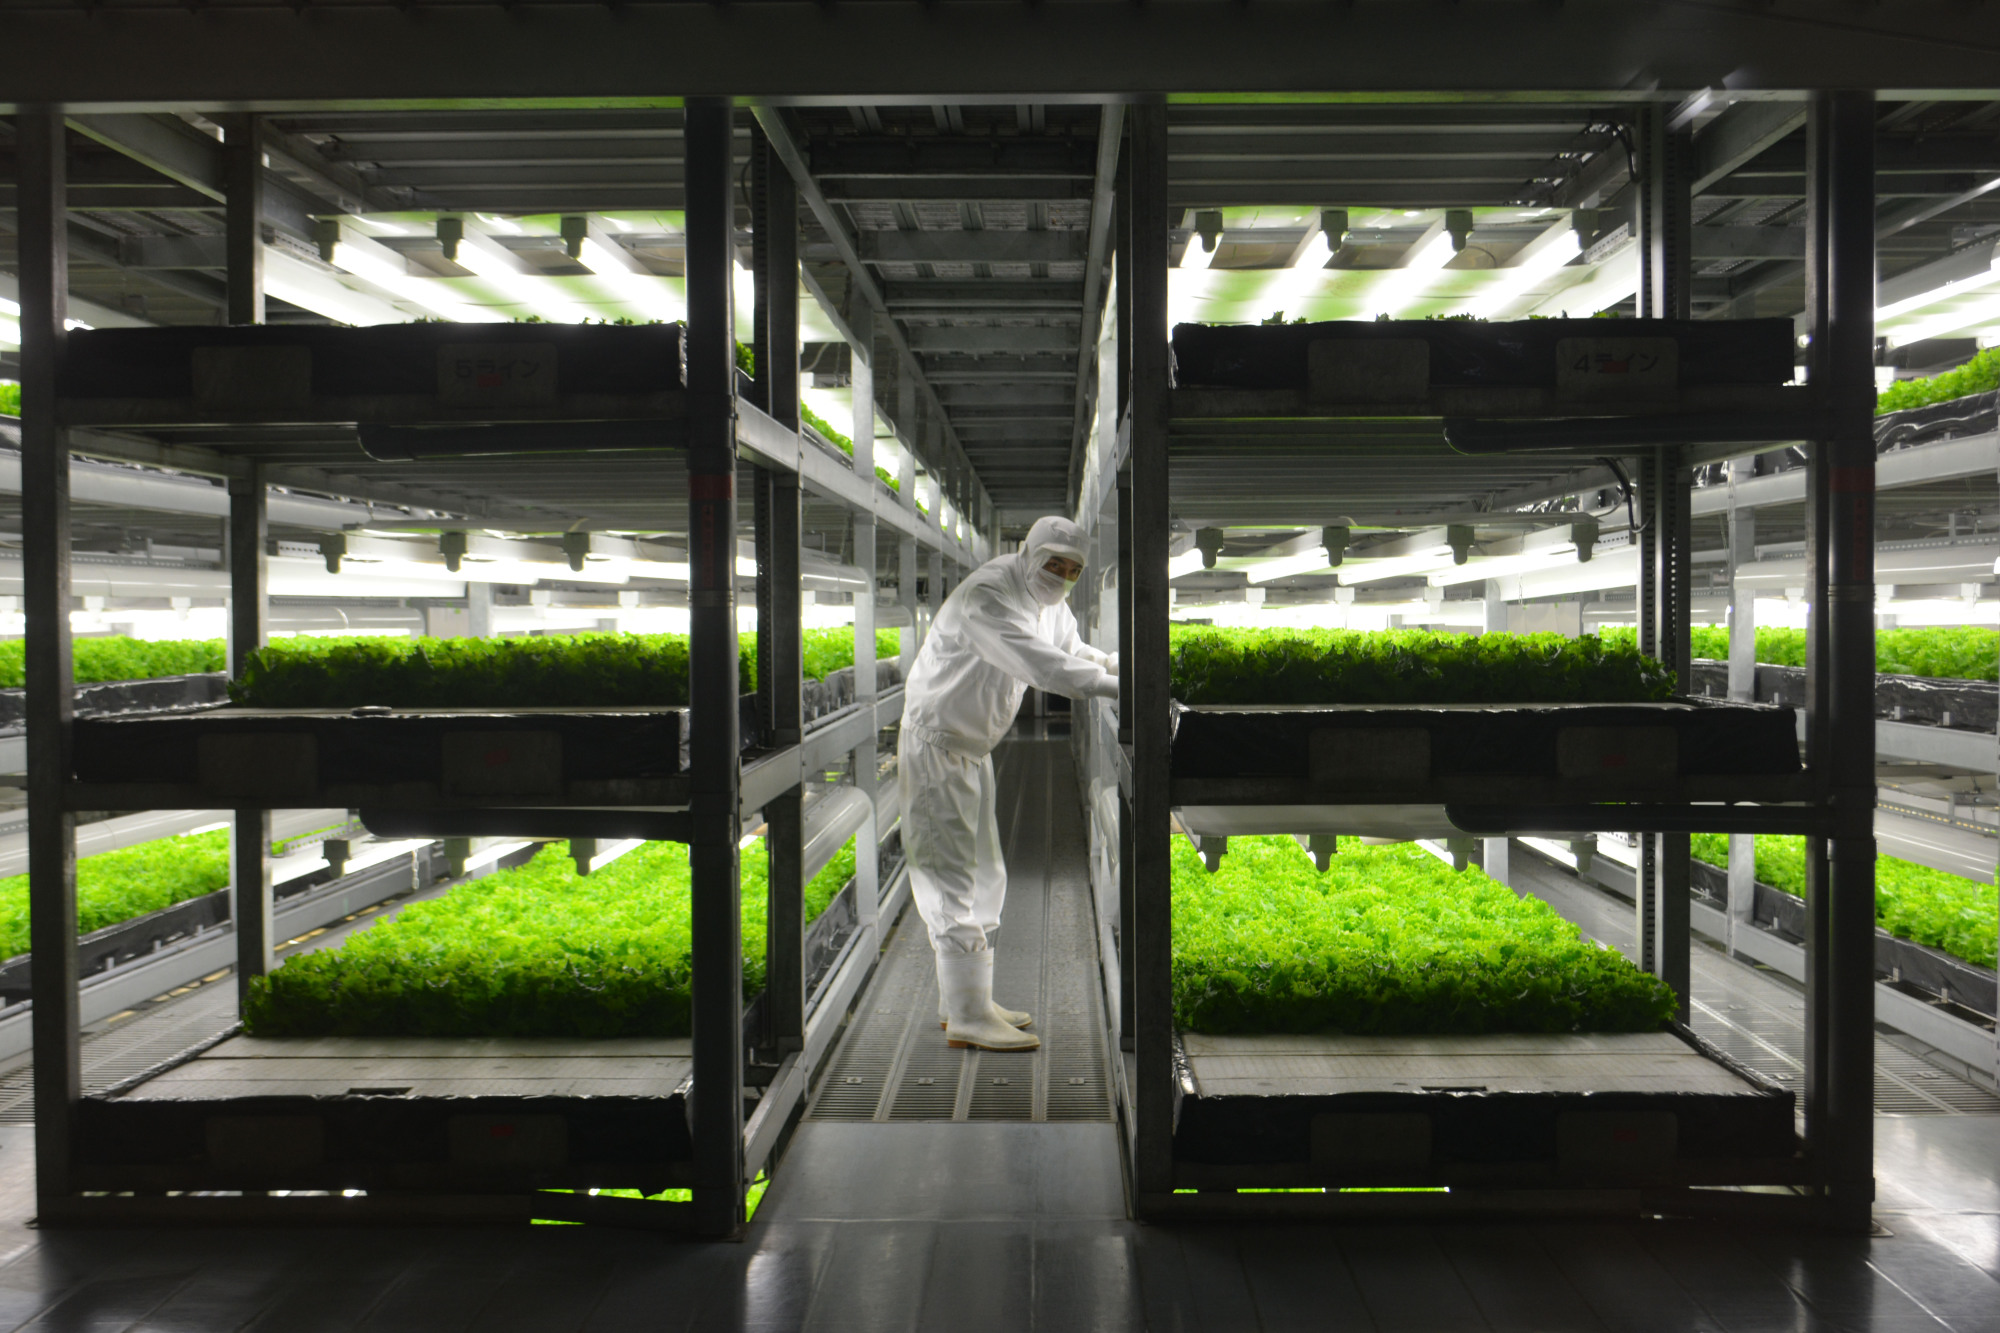 Food factory: At Spread's facility in Kameoka, Kyoto Prefecture, lettuce is grown hydroponically using timed doses of LED light. | J.J. O'DONOGHUE